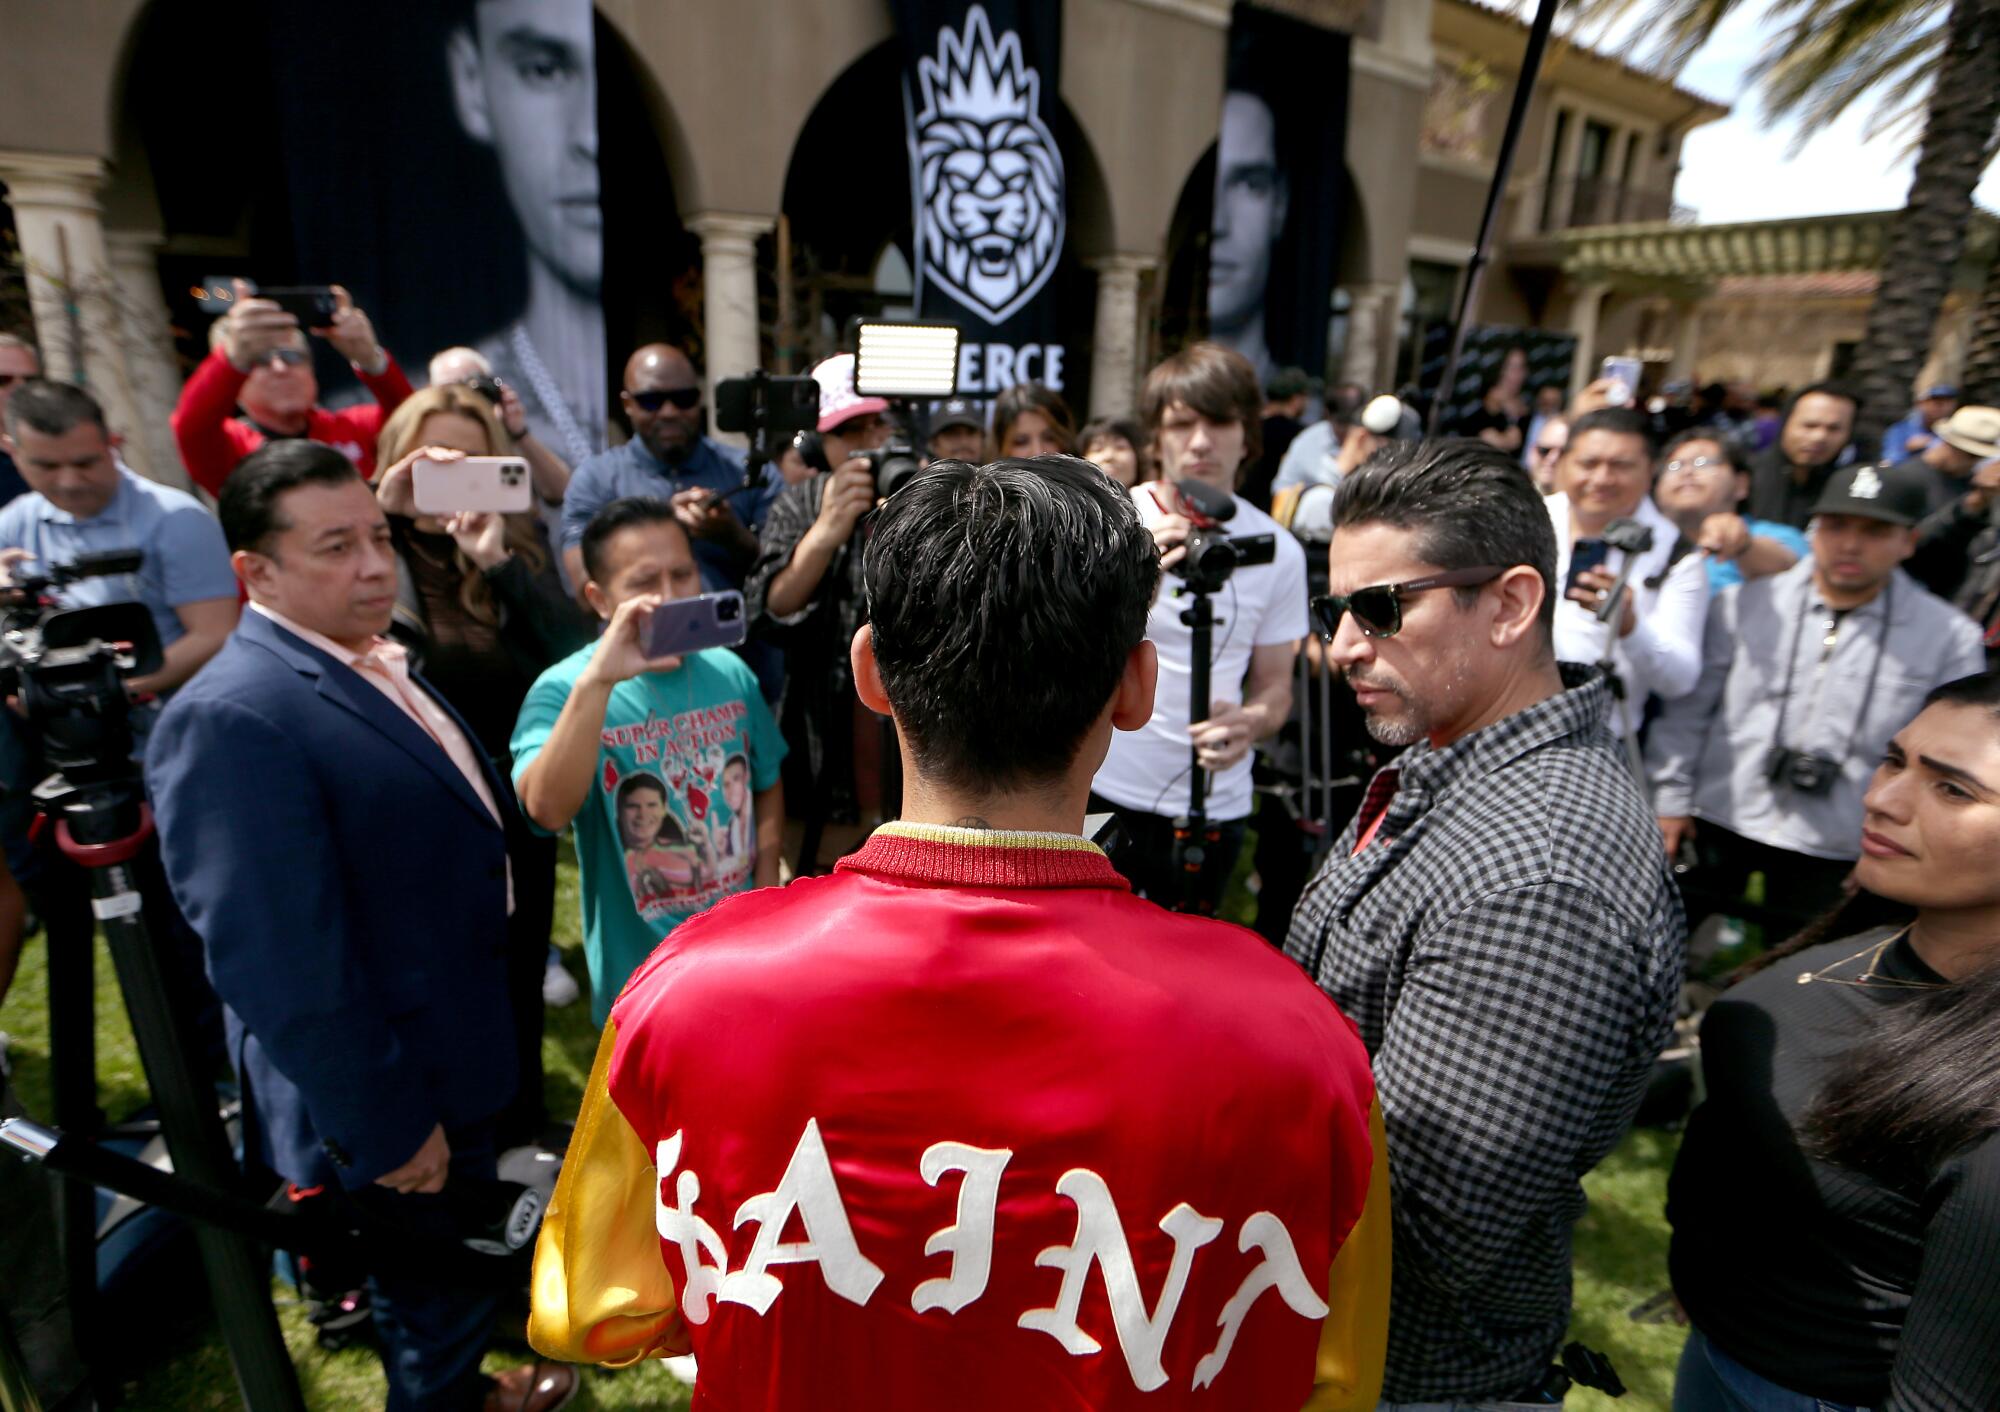 Boxer Ryan Garcia talks with members of the boxing press during his media day event at a mansion in Beverly Hills.